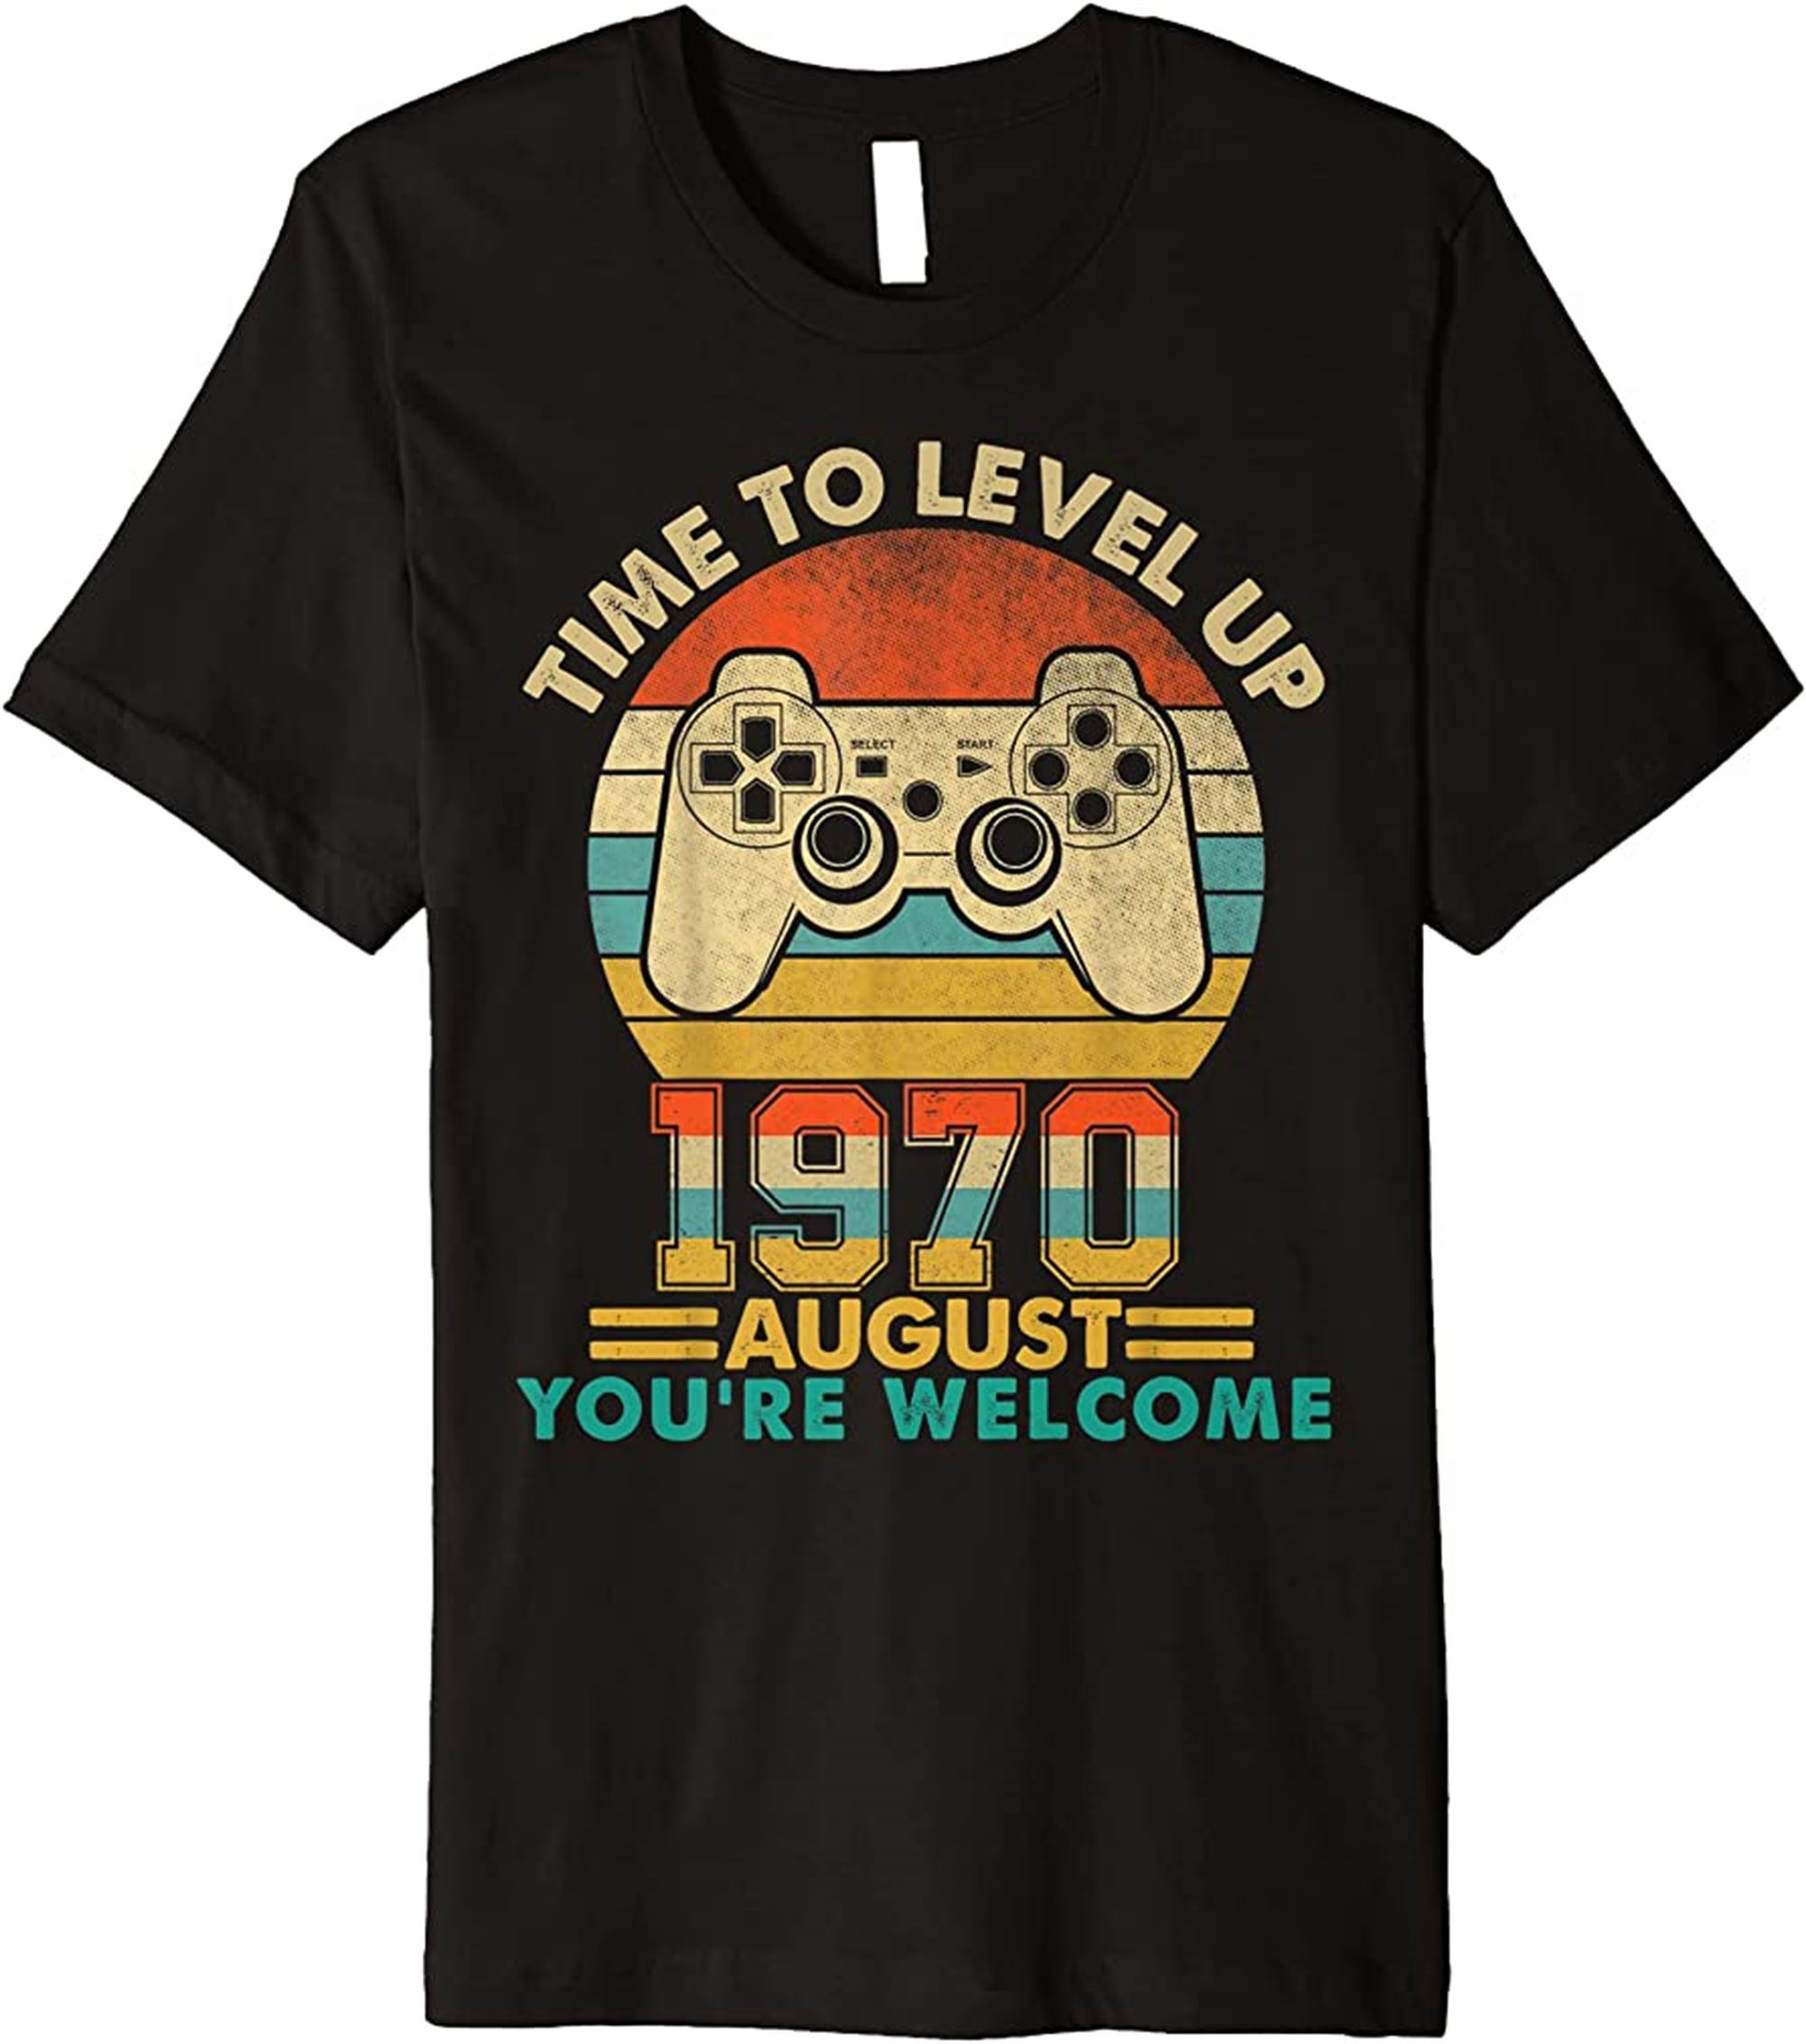 Vintage 1970 August 52 Years Old Video Gamer 52th Birthday Premium T-shirt Full Size Up To 5xl